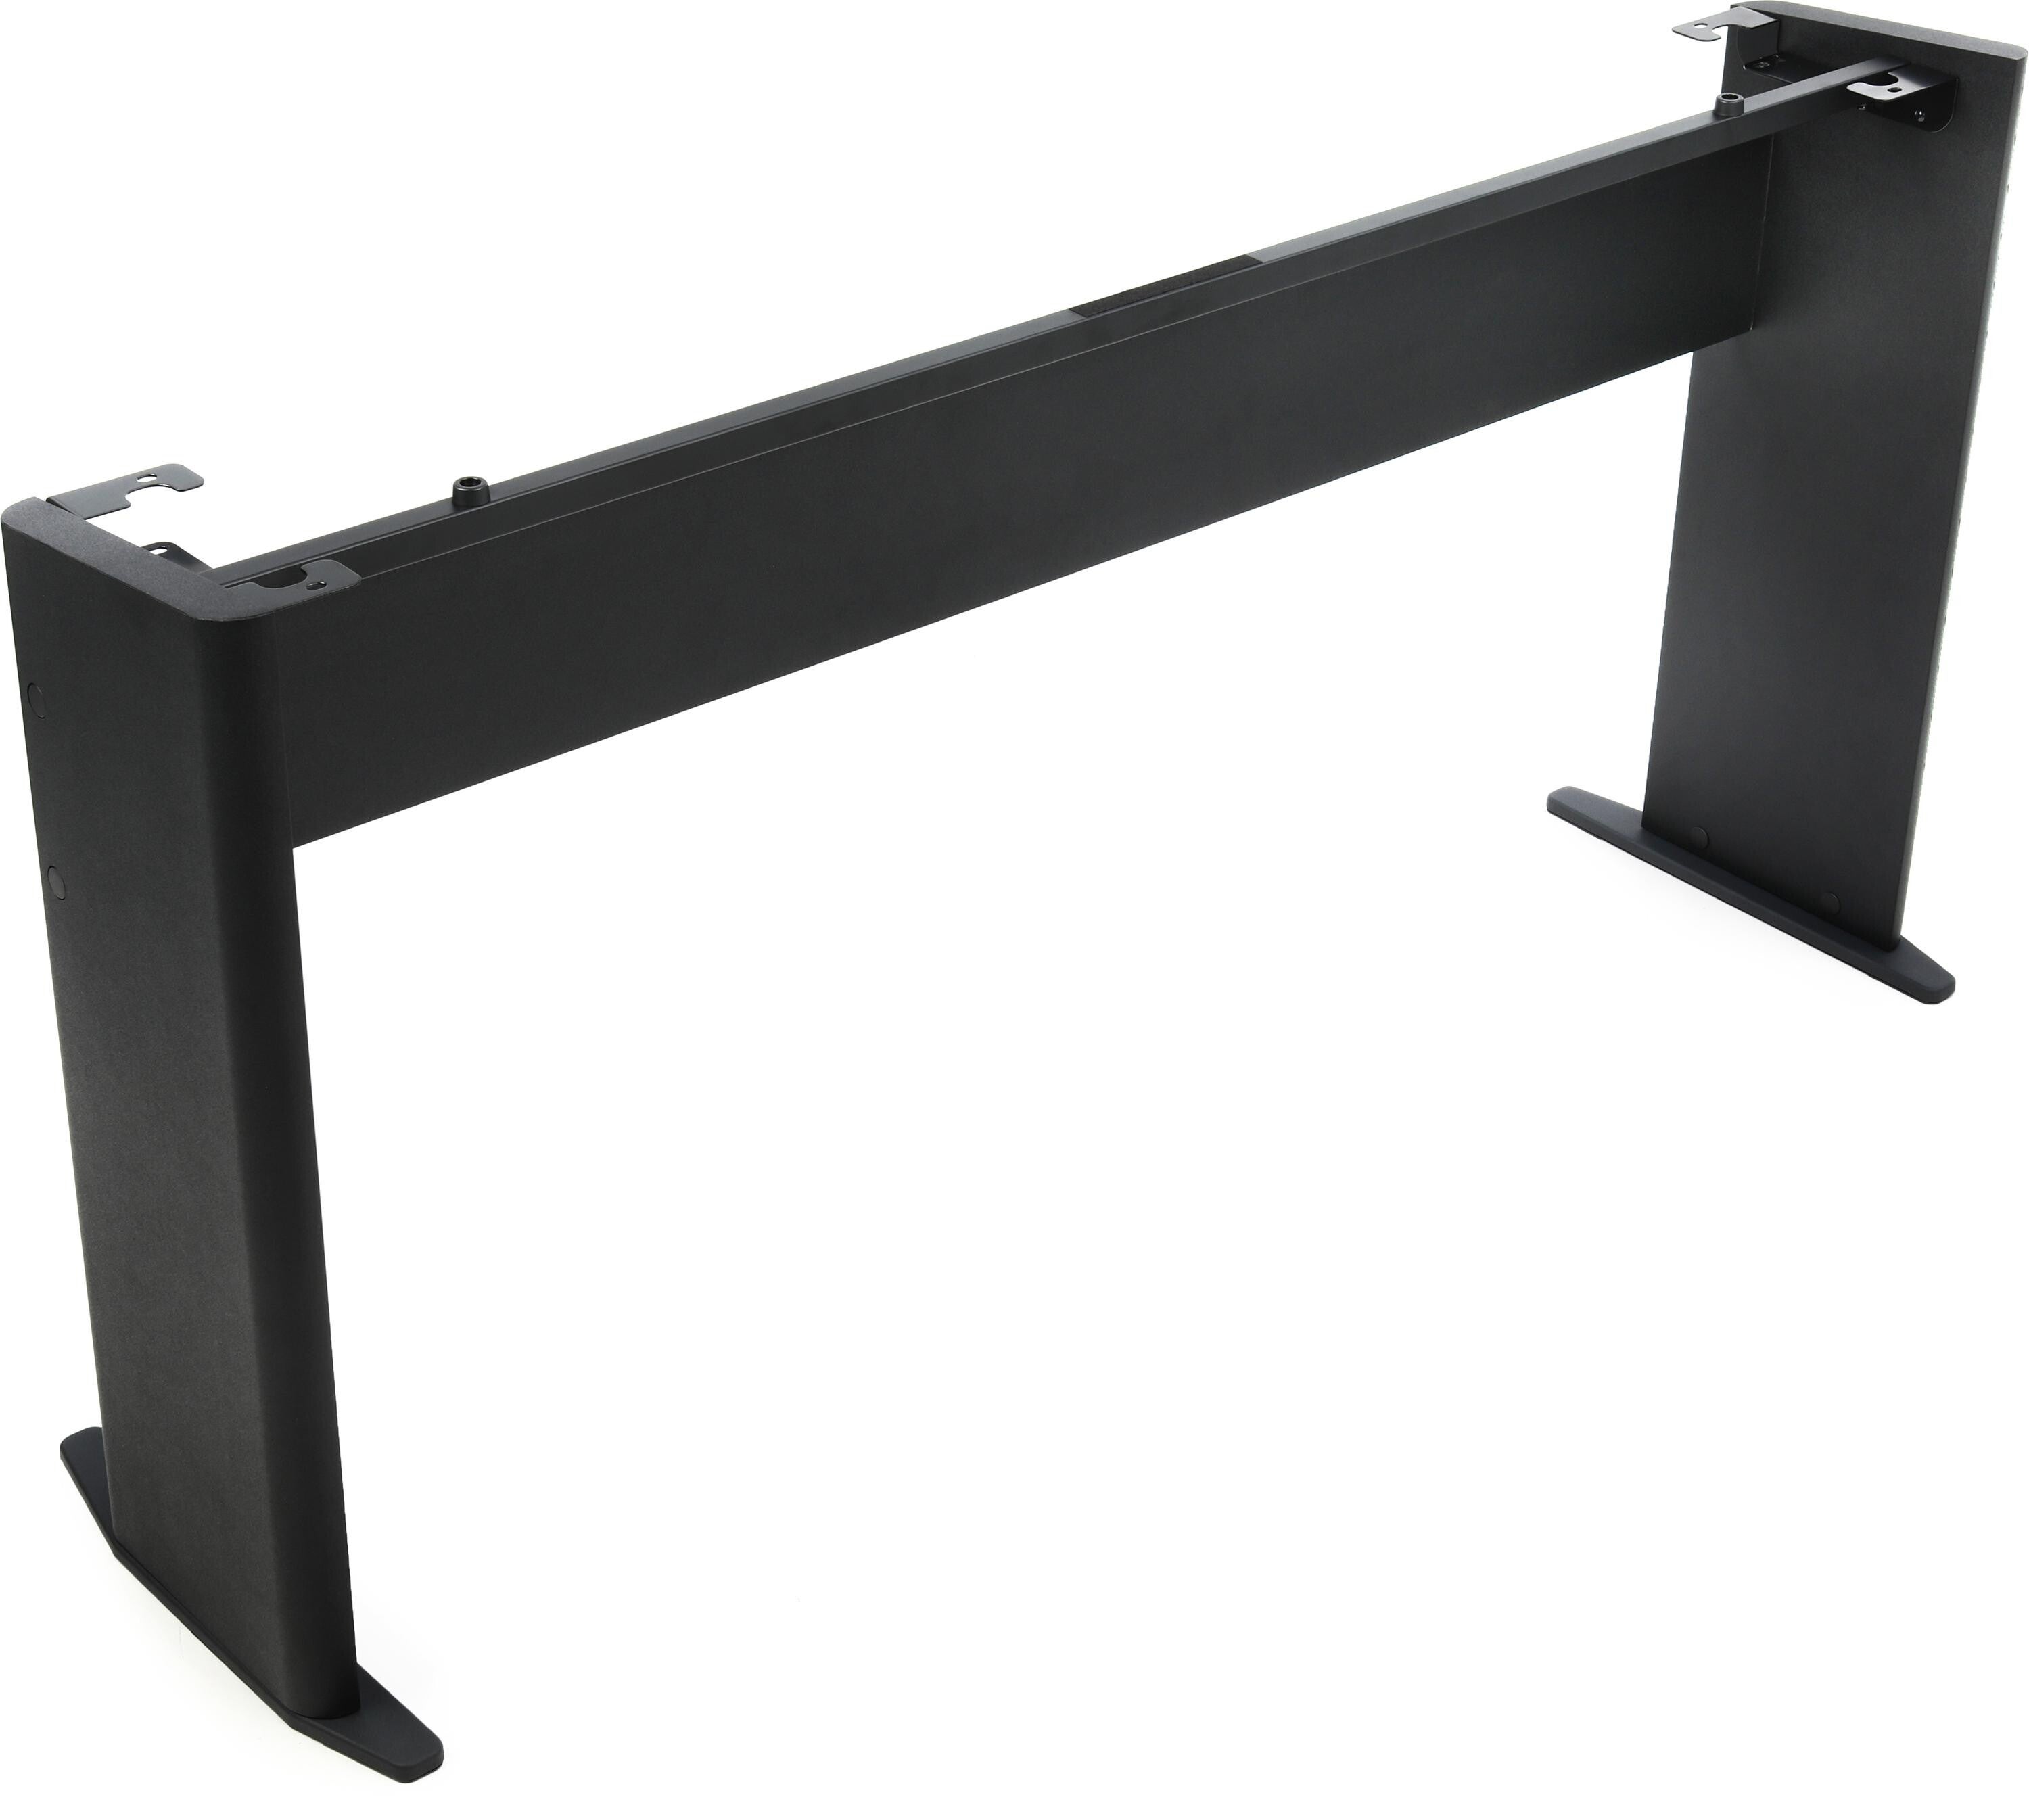 Casio CS-68 Stand for PX-S1100/3100 - Black | Sweetwater